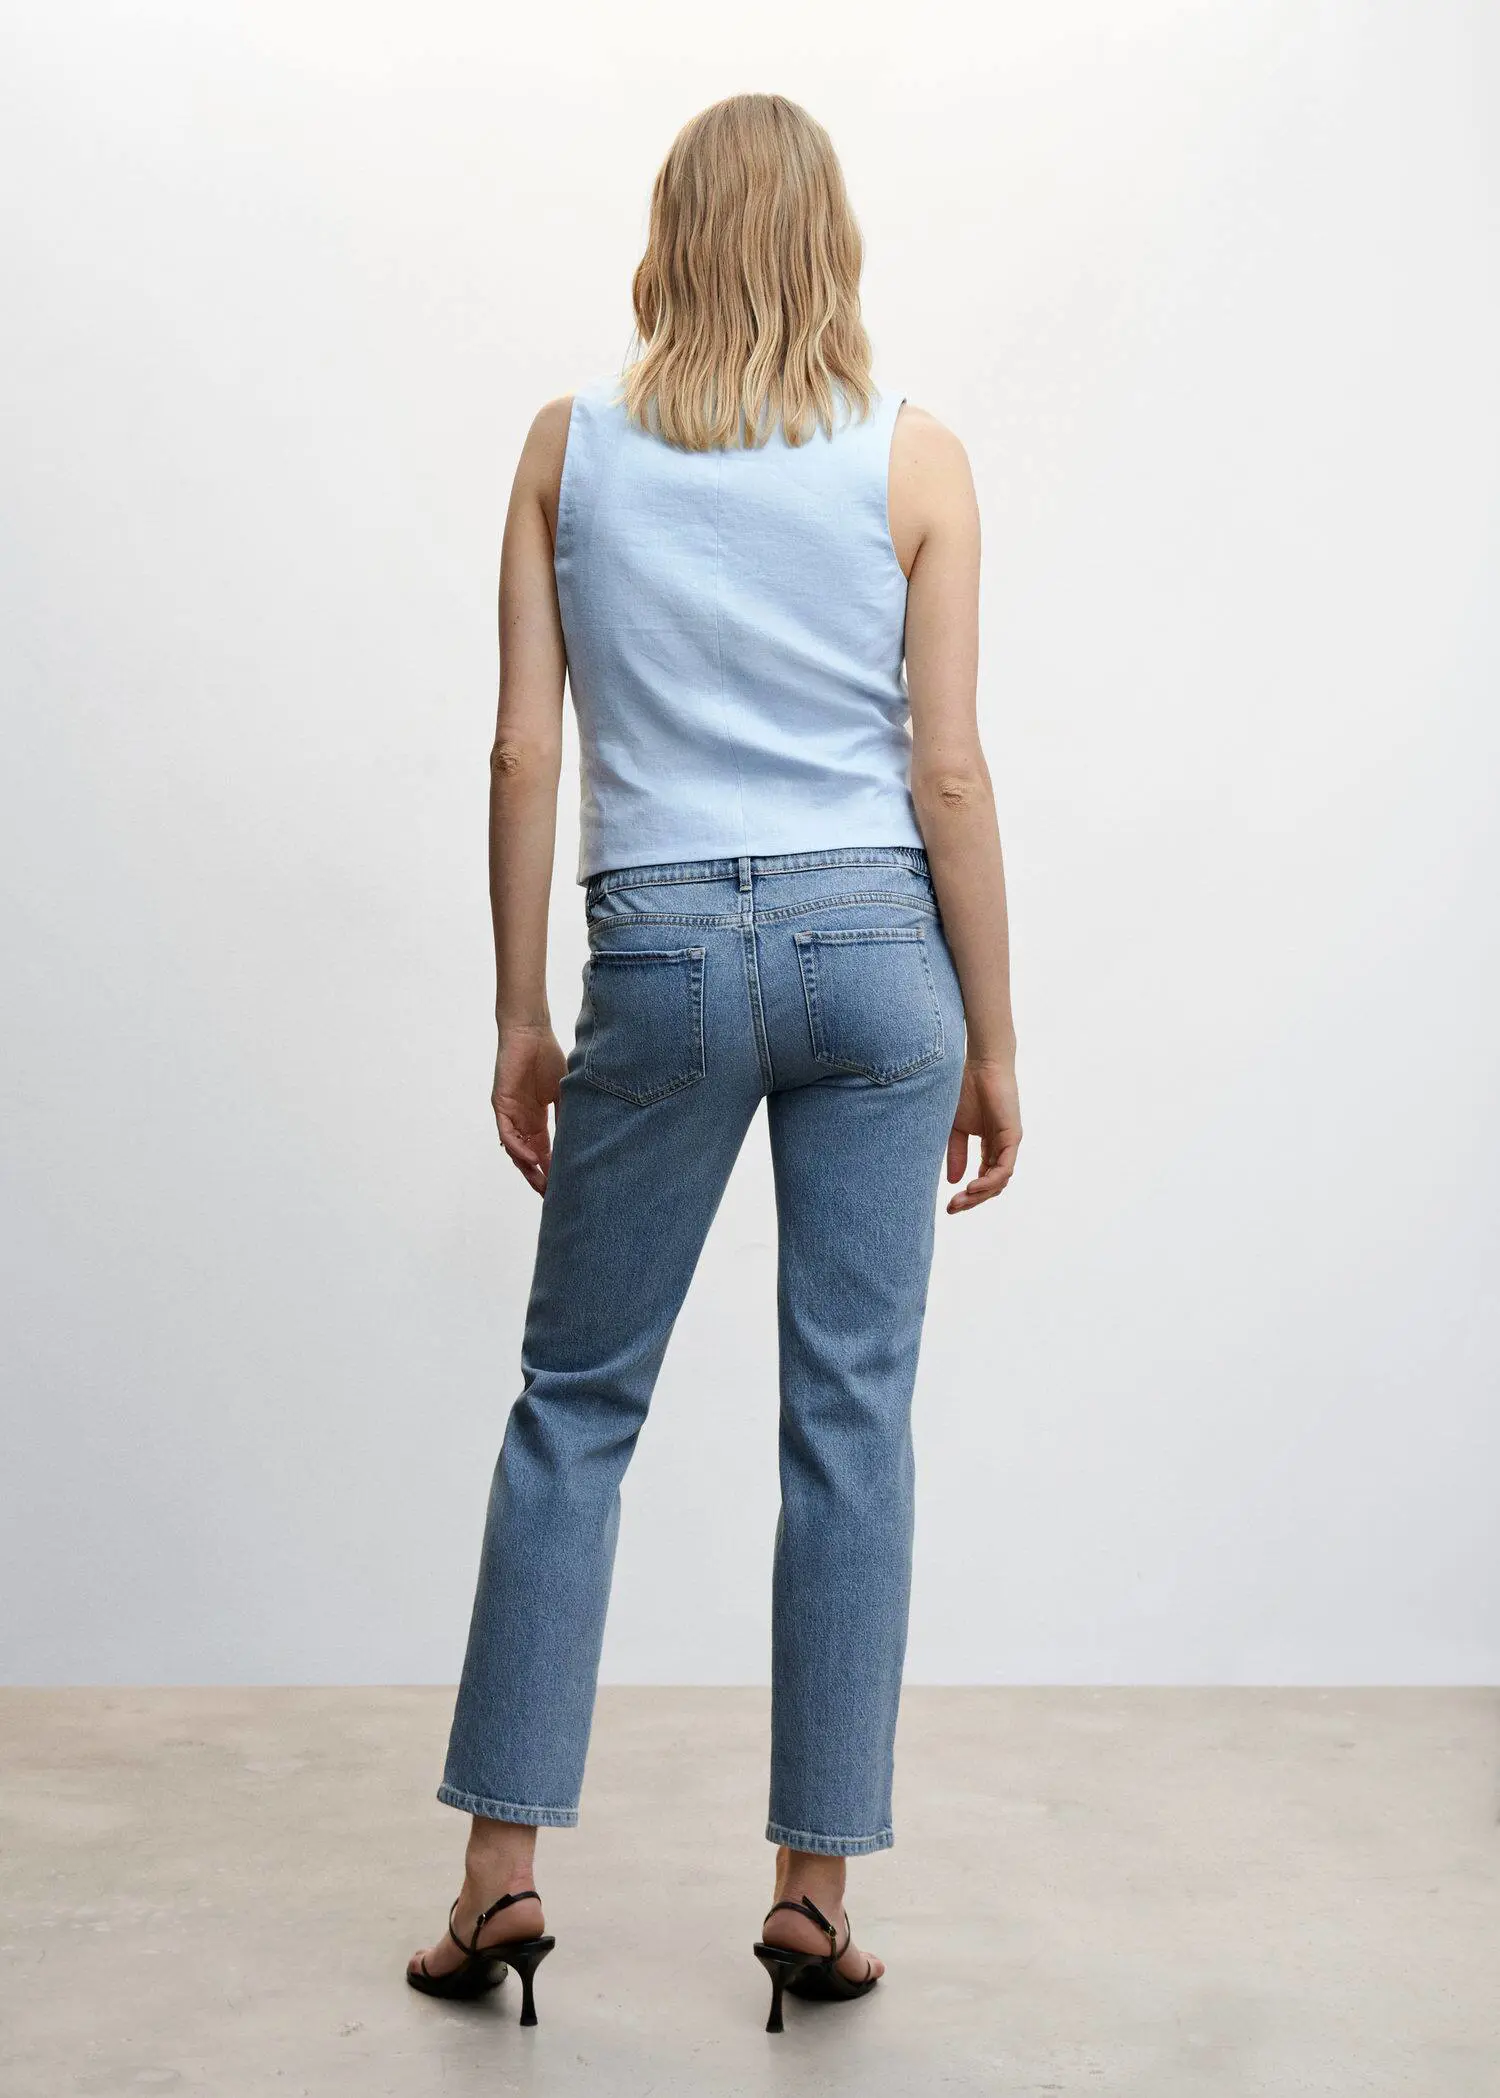 Mango Maternity Straight Jeans. a woman in a light blue shirt and jeans. 